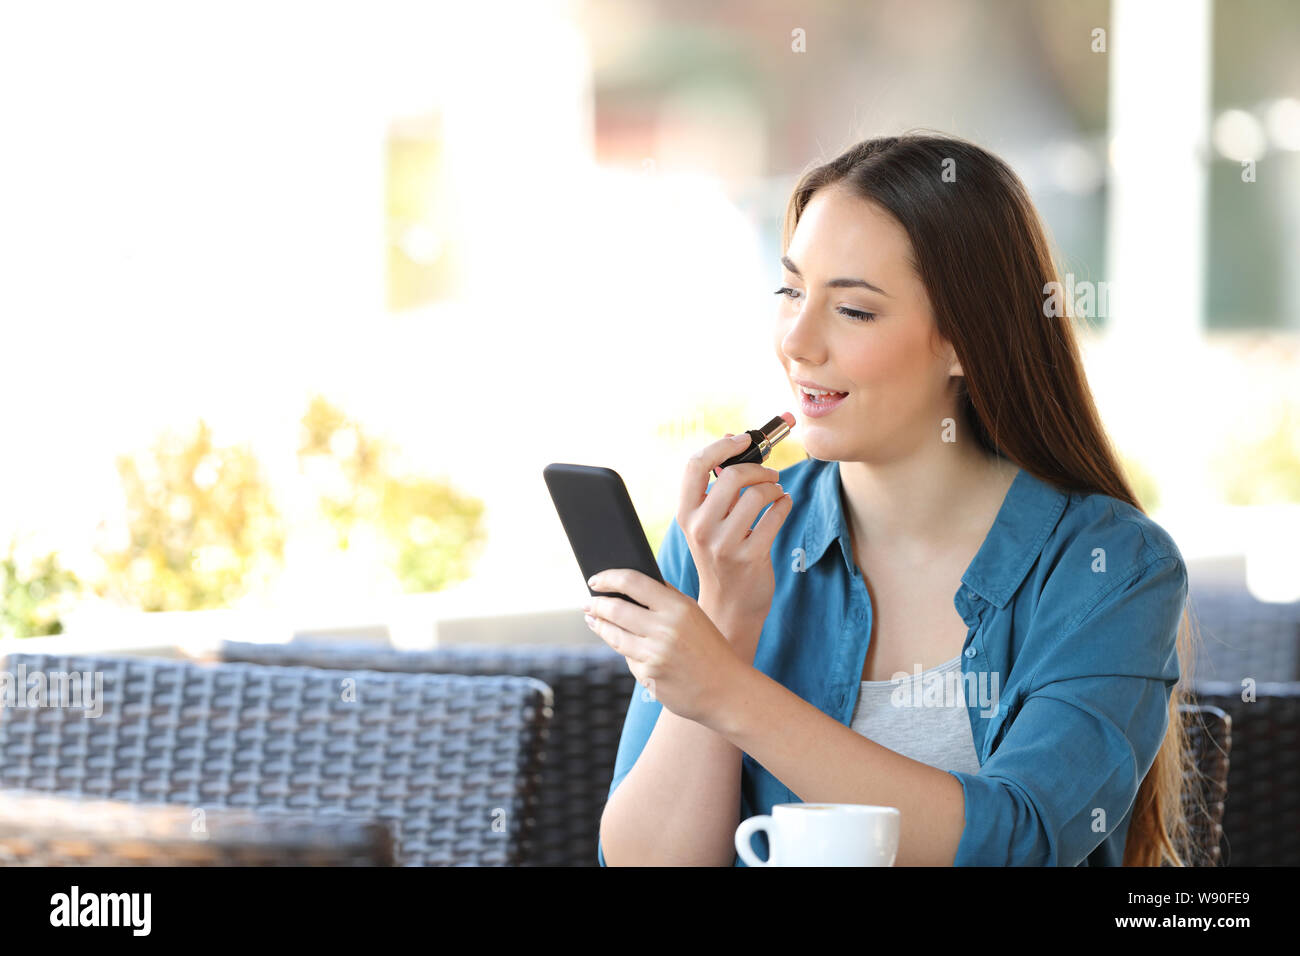 Woman painting lips using a phone as a mirror sitting in a coffee shop terrace Stock Photo